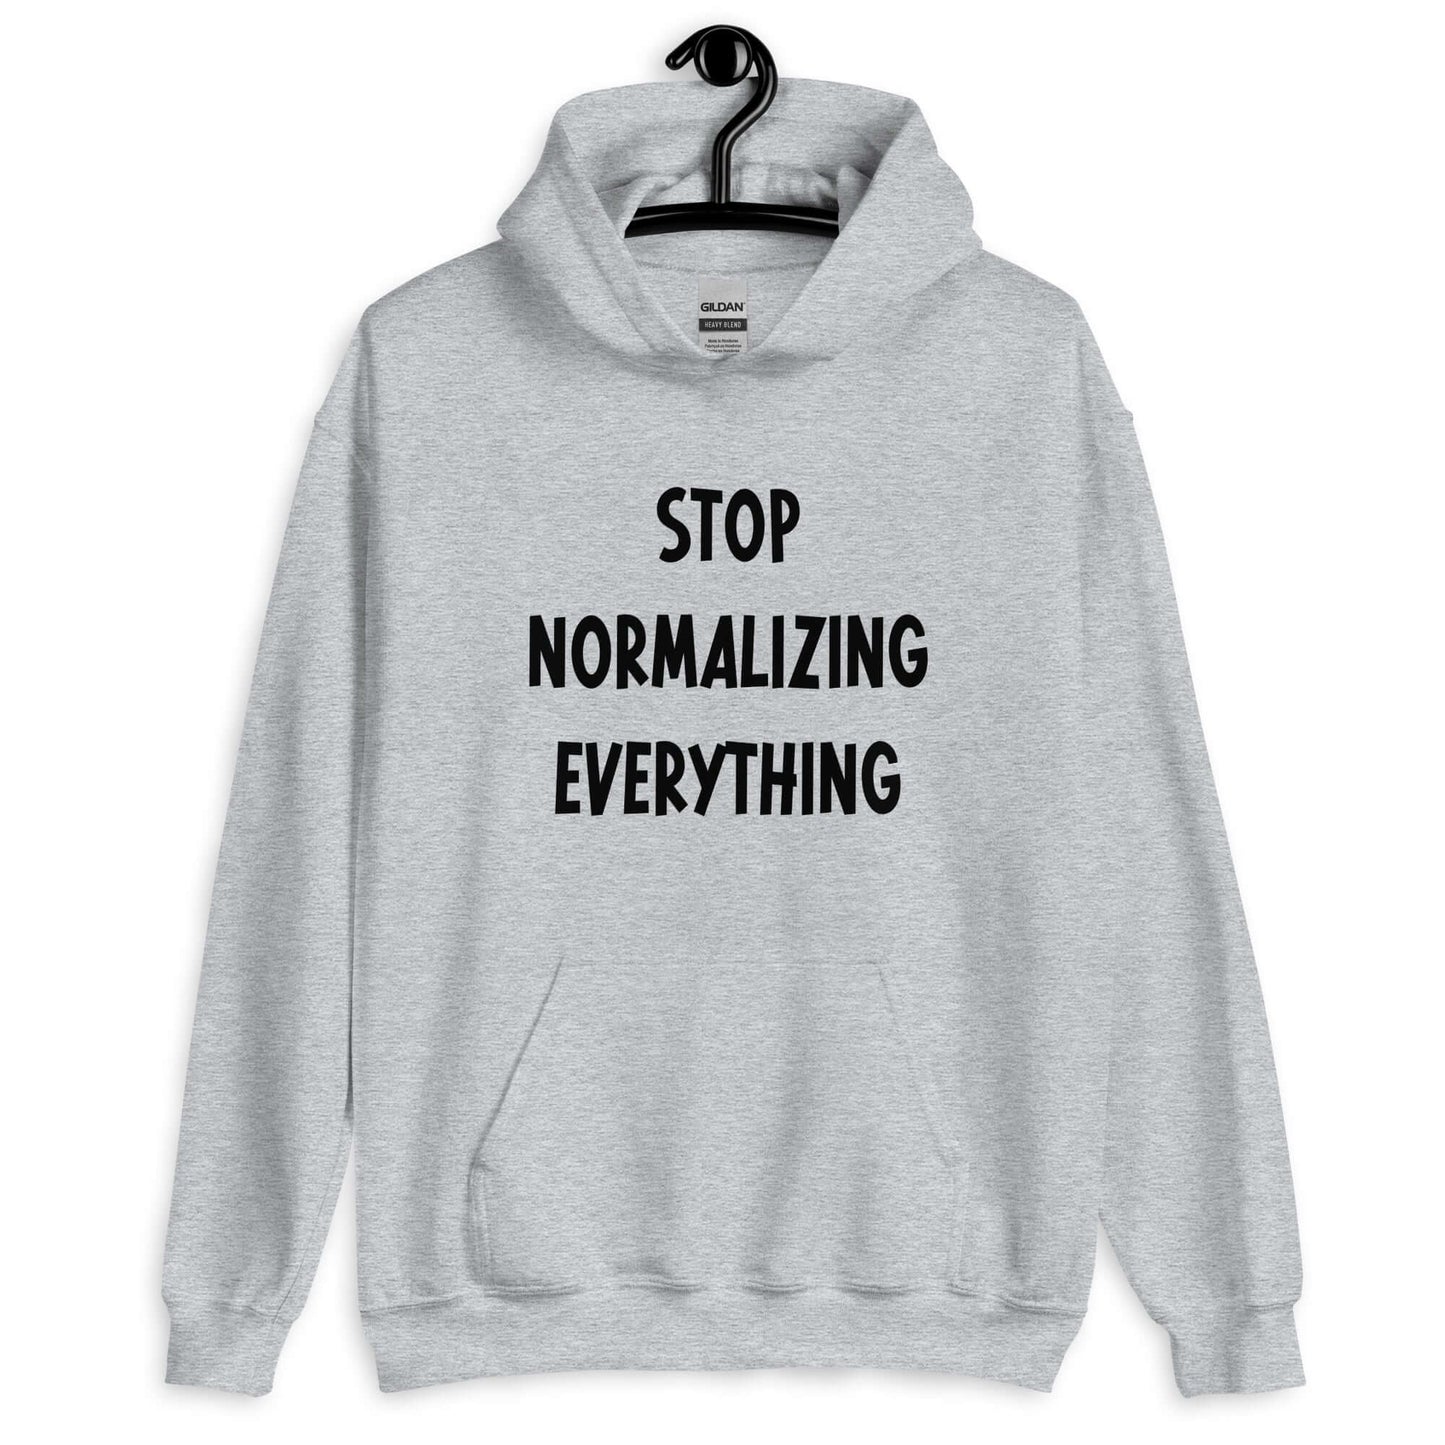 Stop normalizing everything hoodie